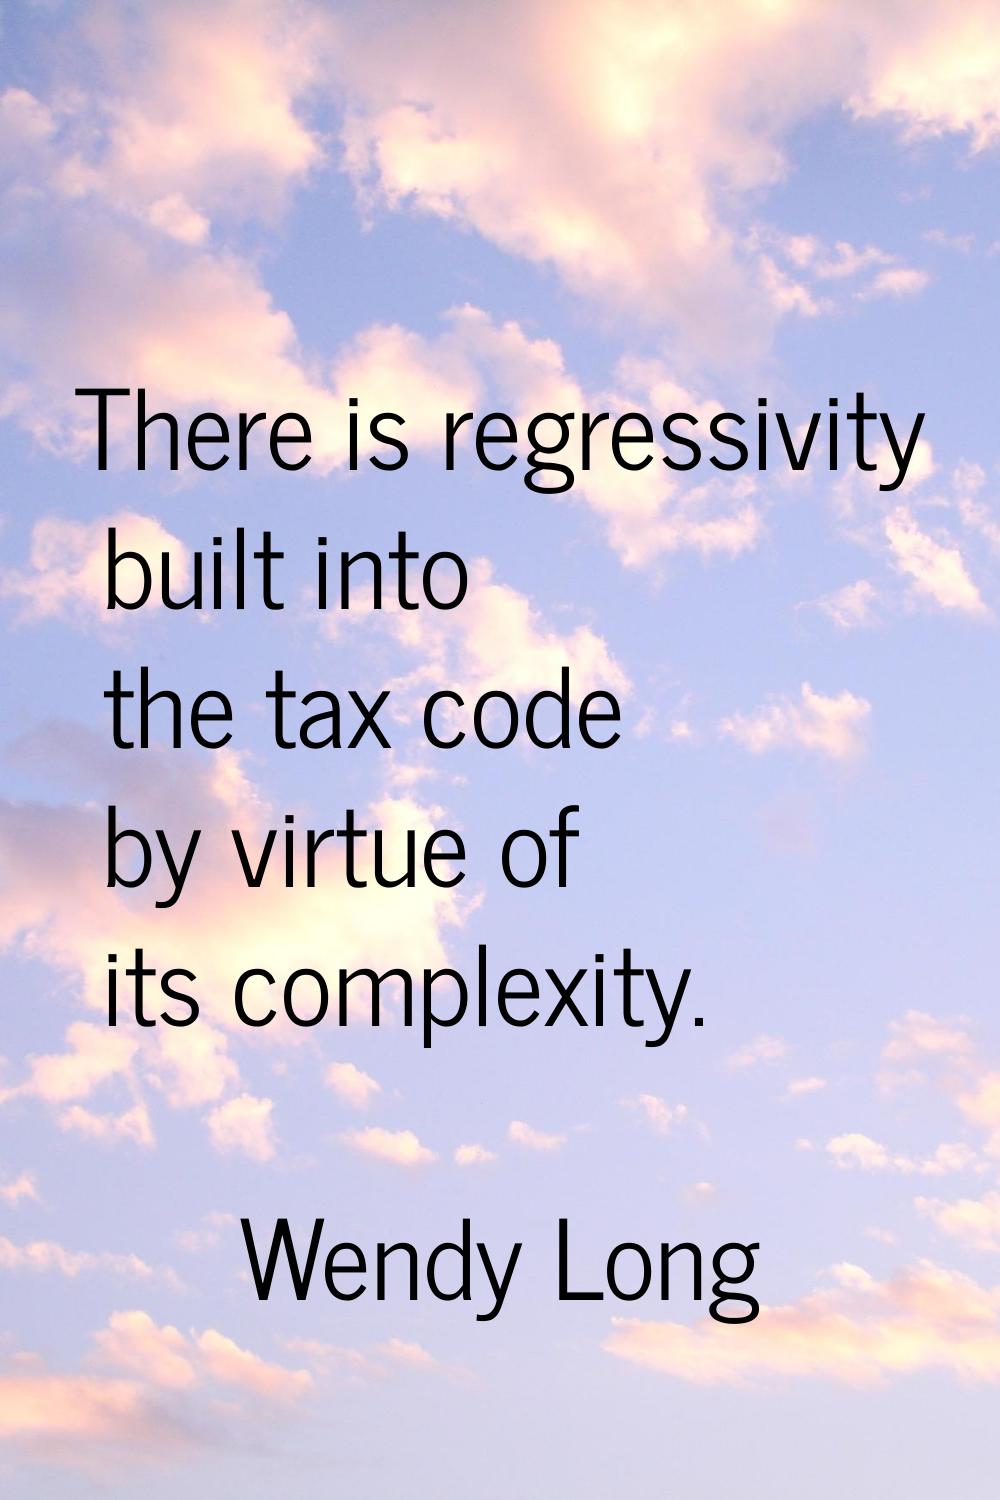 There is regressivity built into the tax code by virtue of its complexity.